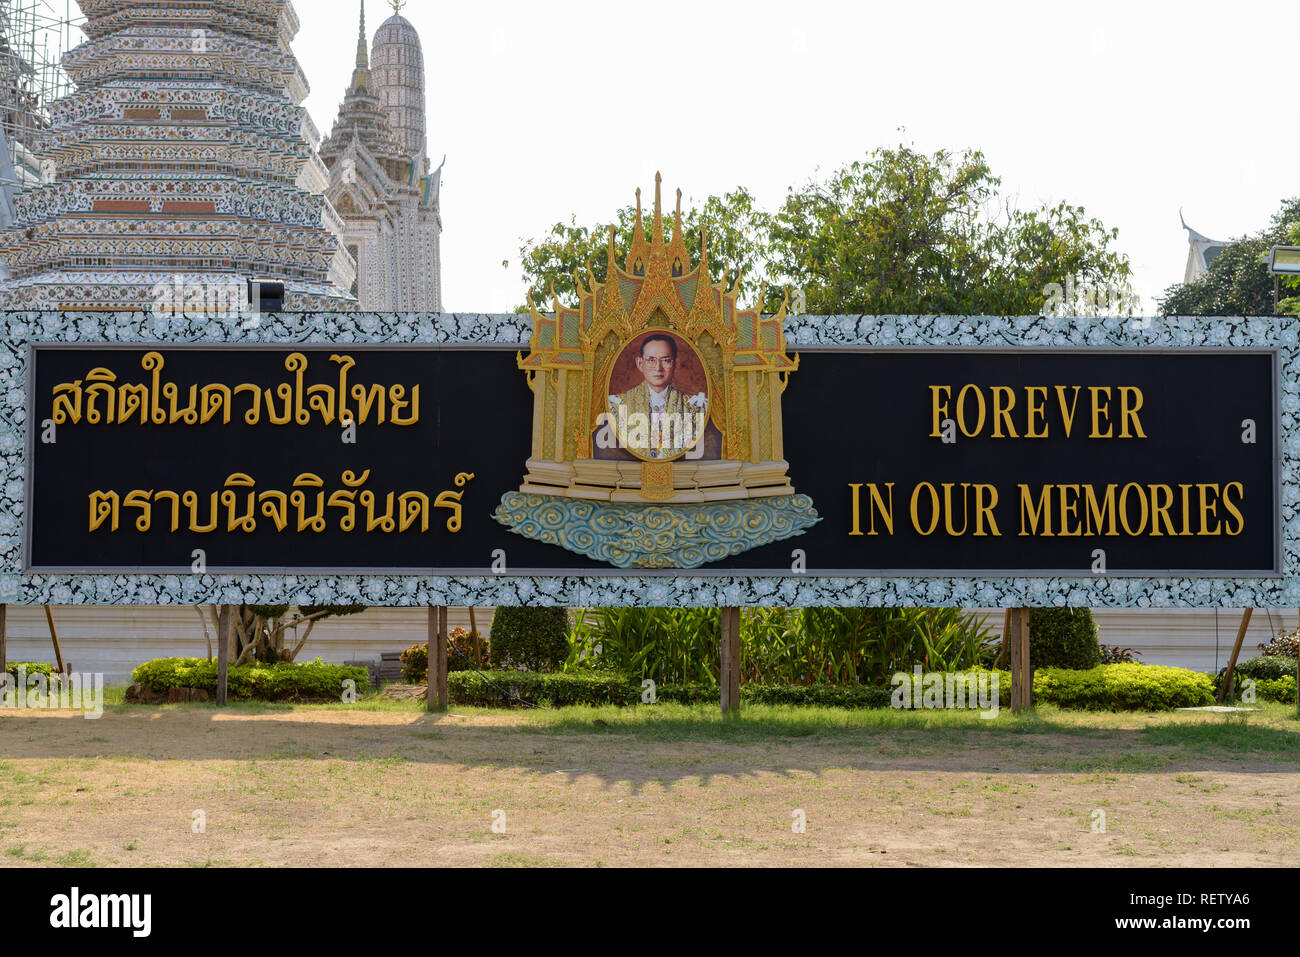 BANGKOK, THAILAND MARCH 15, 2017: Signboard that pays respect and condolences to King Bhumibol Adulyadej, the ninth monarch of Thailand from the Chakri dynasty as Rama IX, located at the Wat Arun temple in Yai district of Bangkok, Thailand Stock Photo